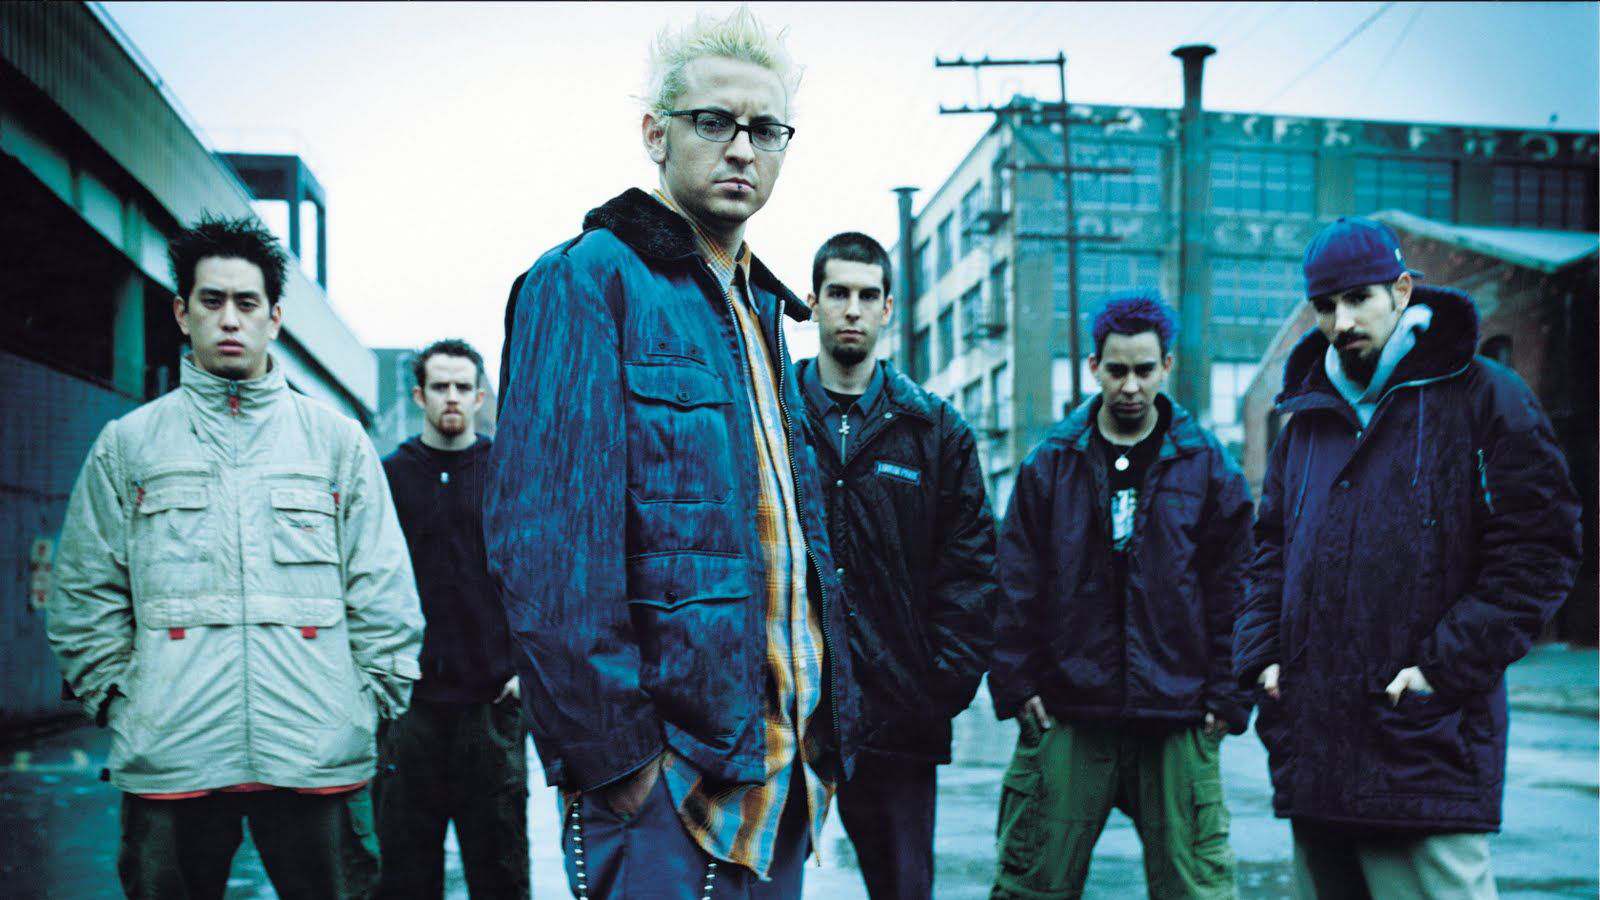 LINKIN PARK Our label tried to "change the DNA" of our band, CHESTER